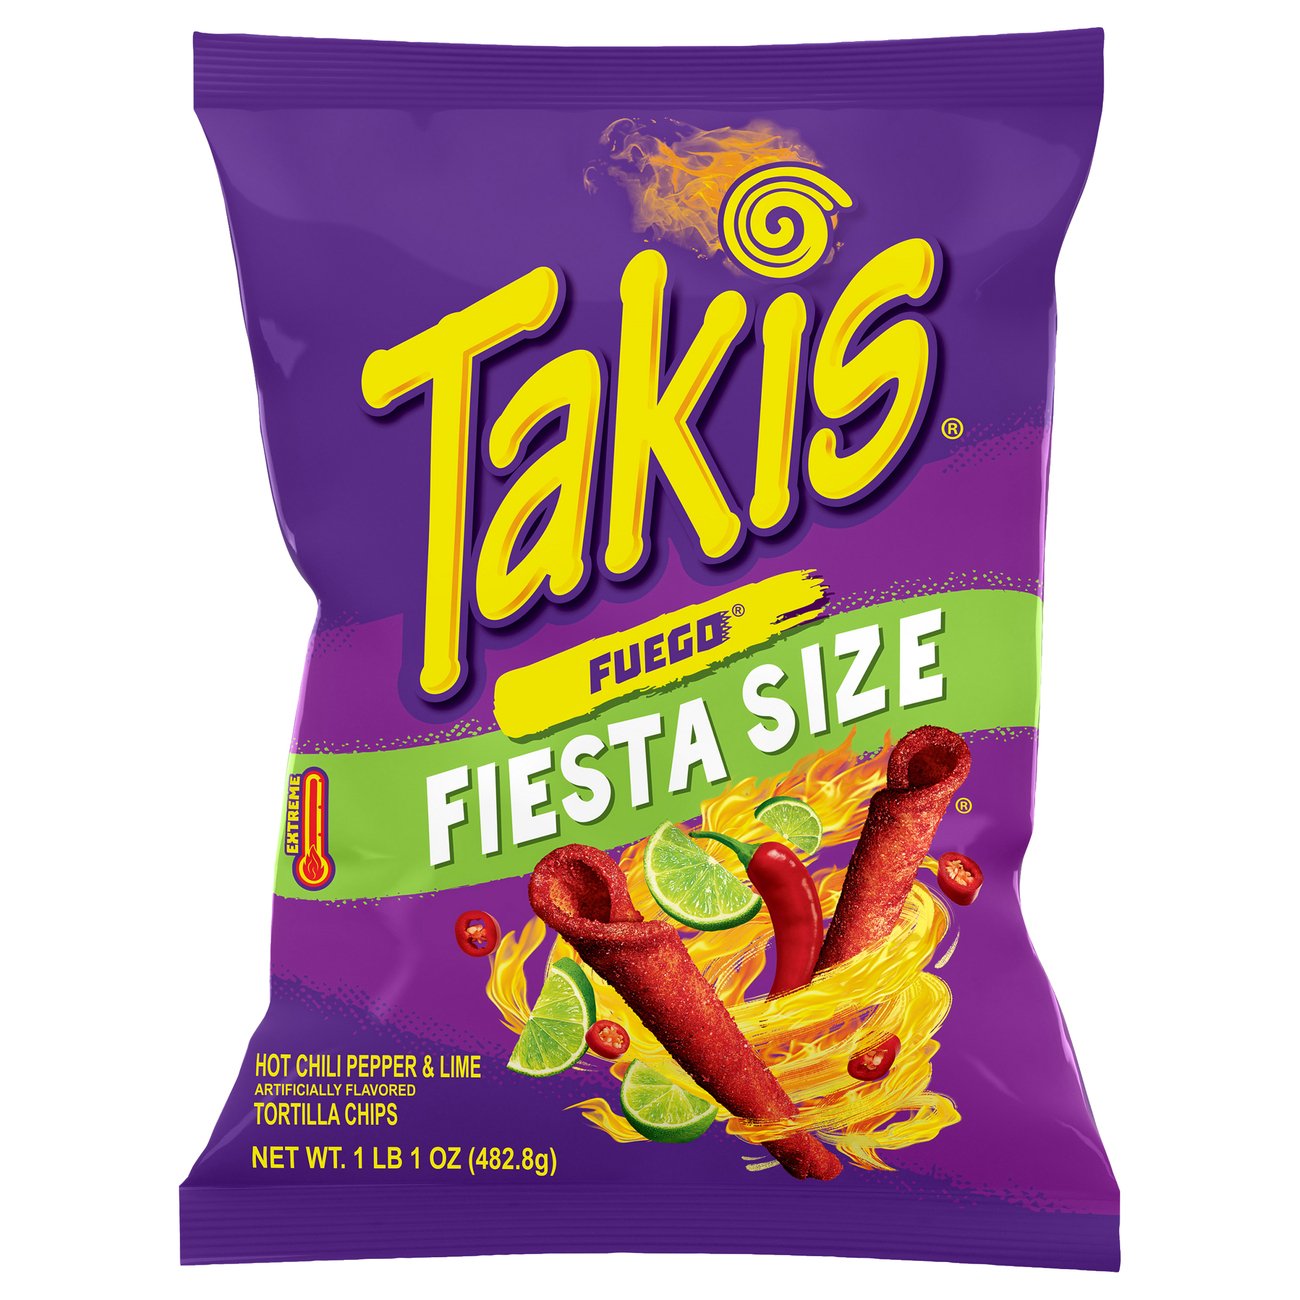 Takis Fuego Tortilla Chips Spicy Chili Pepper & Lime Flavour 280g